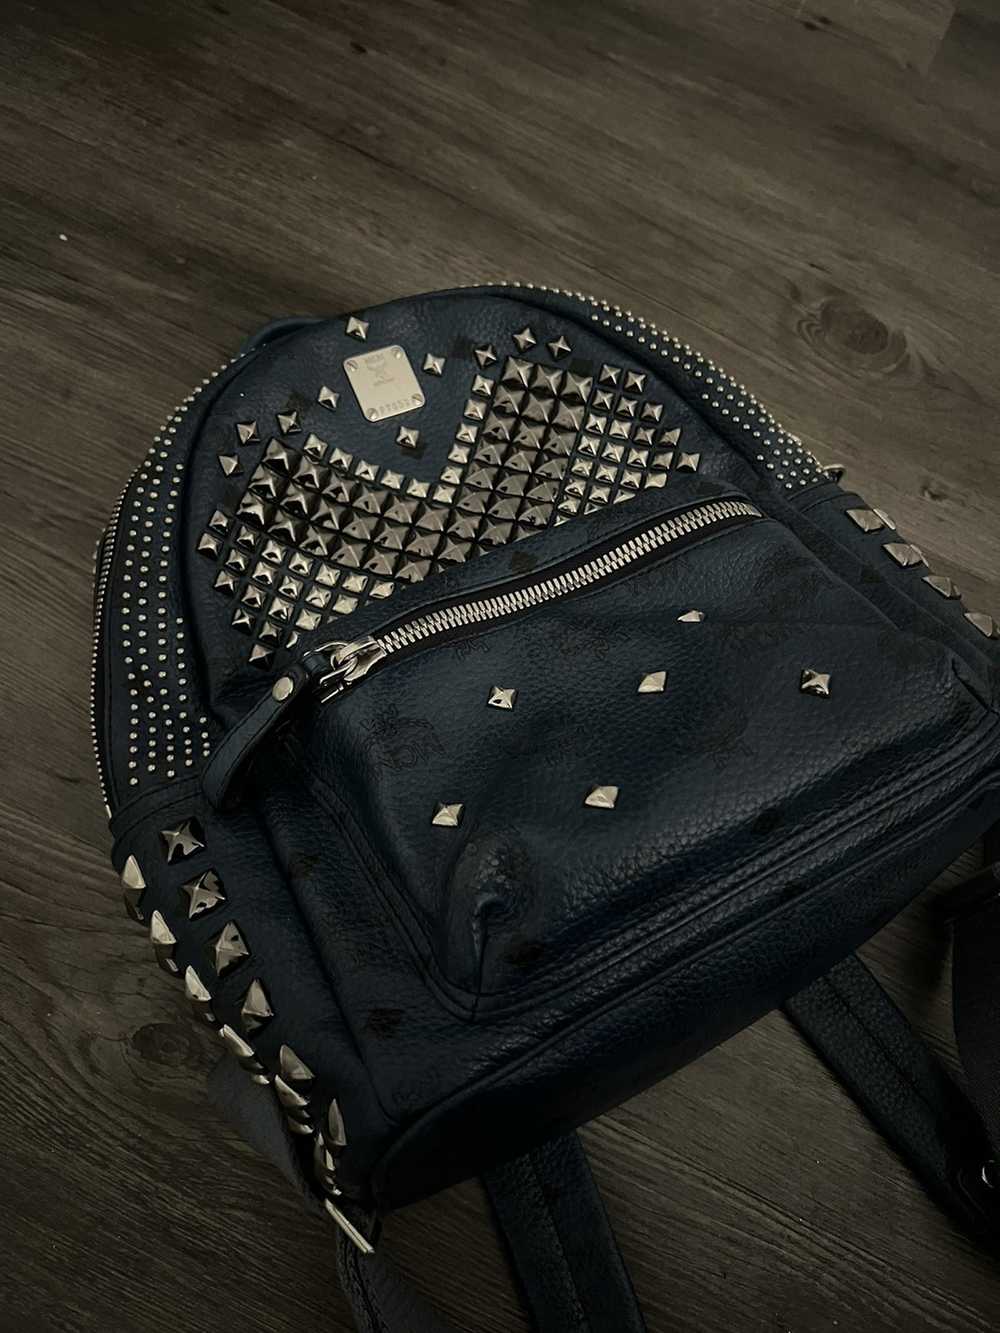 MCM Mcm small studded backpack - image 2